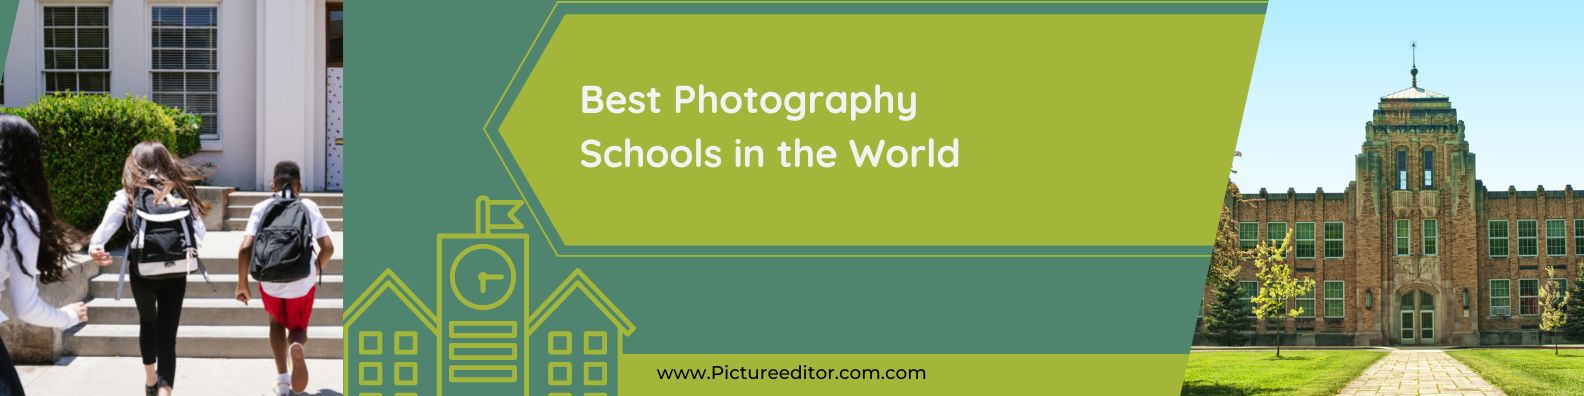 Best Photography Schools in the World